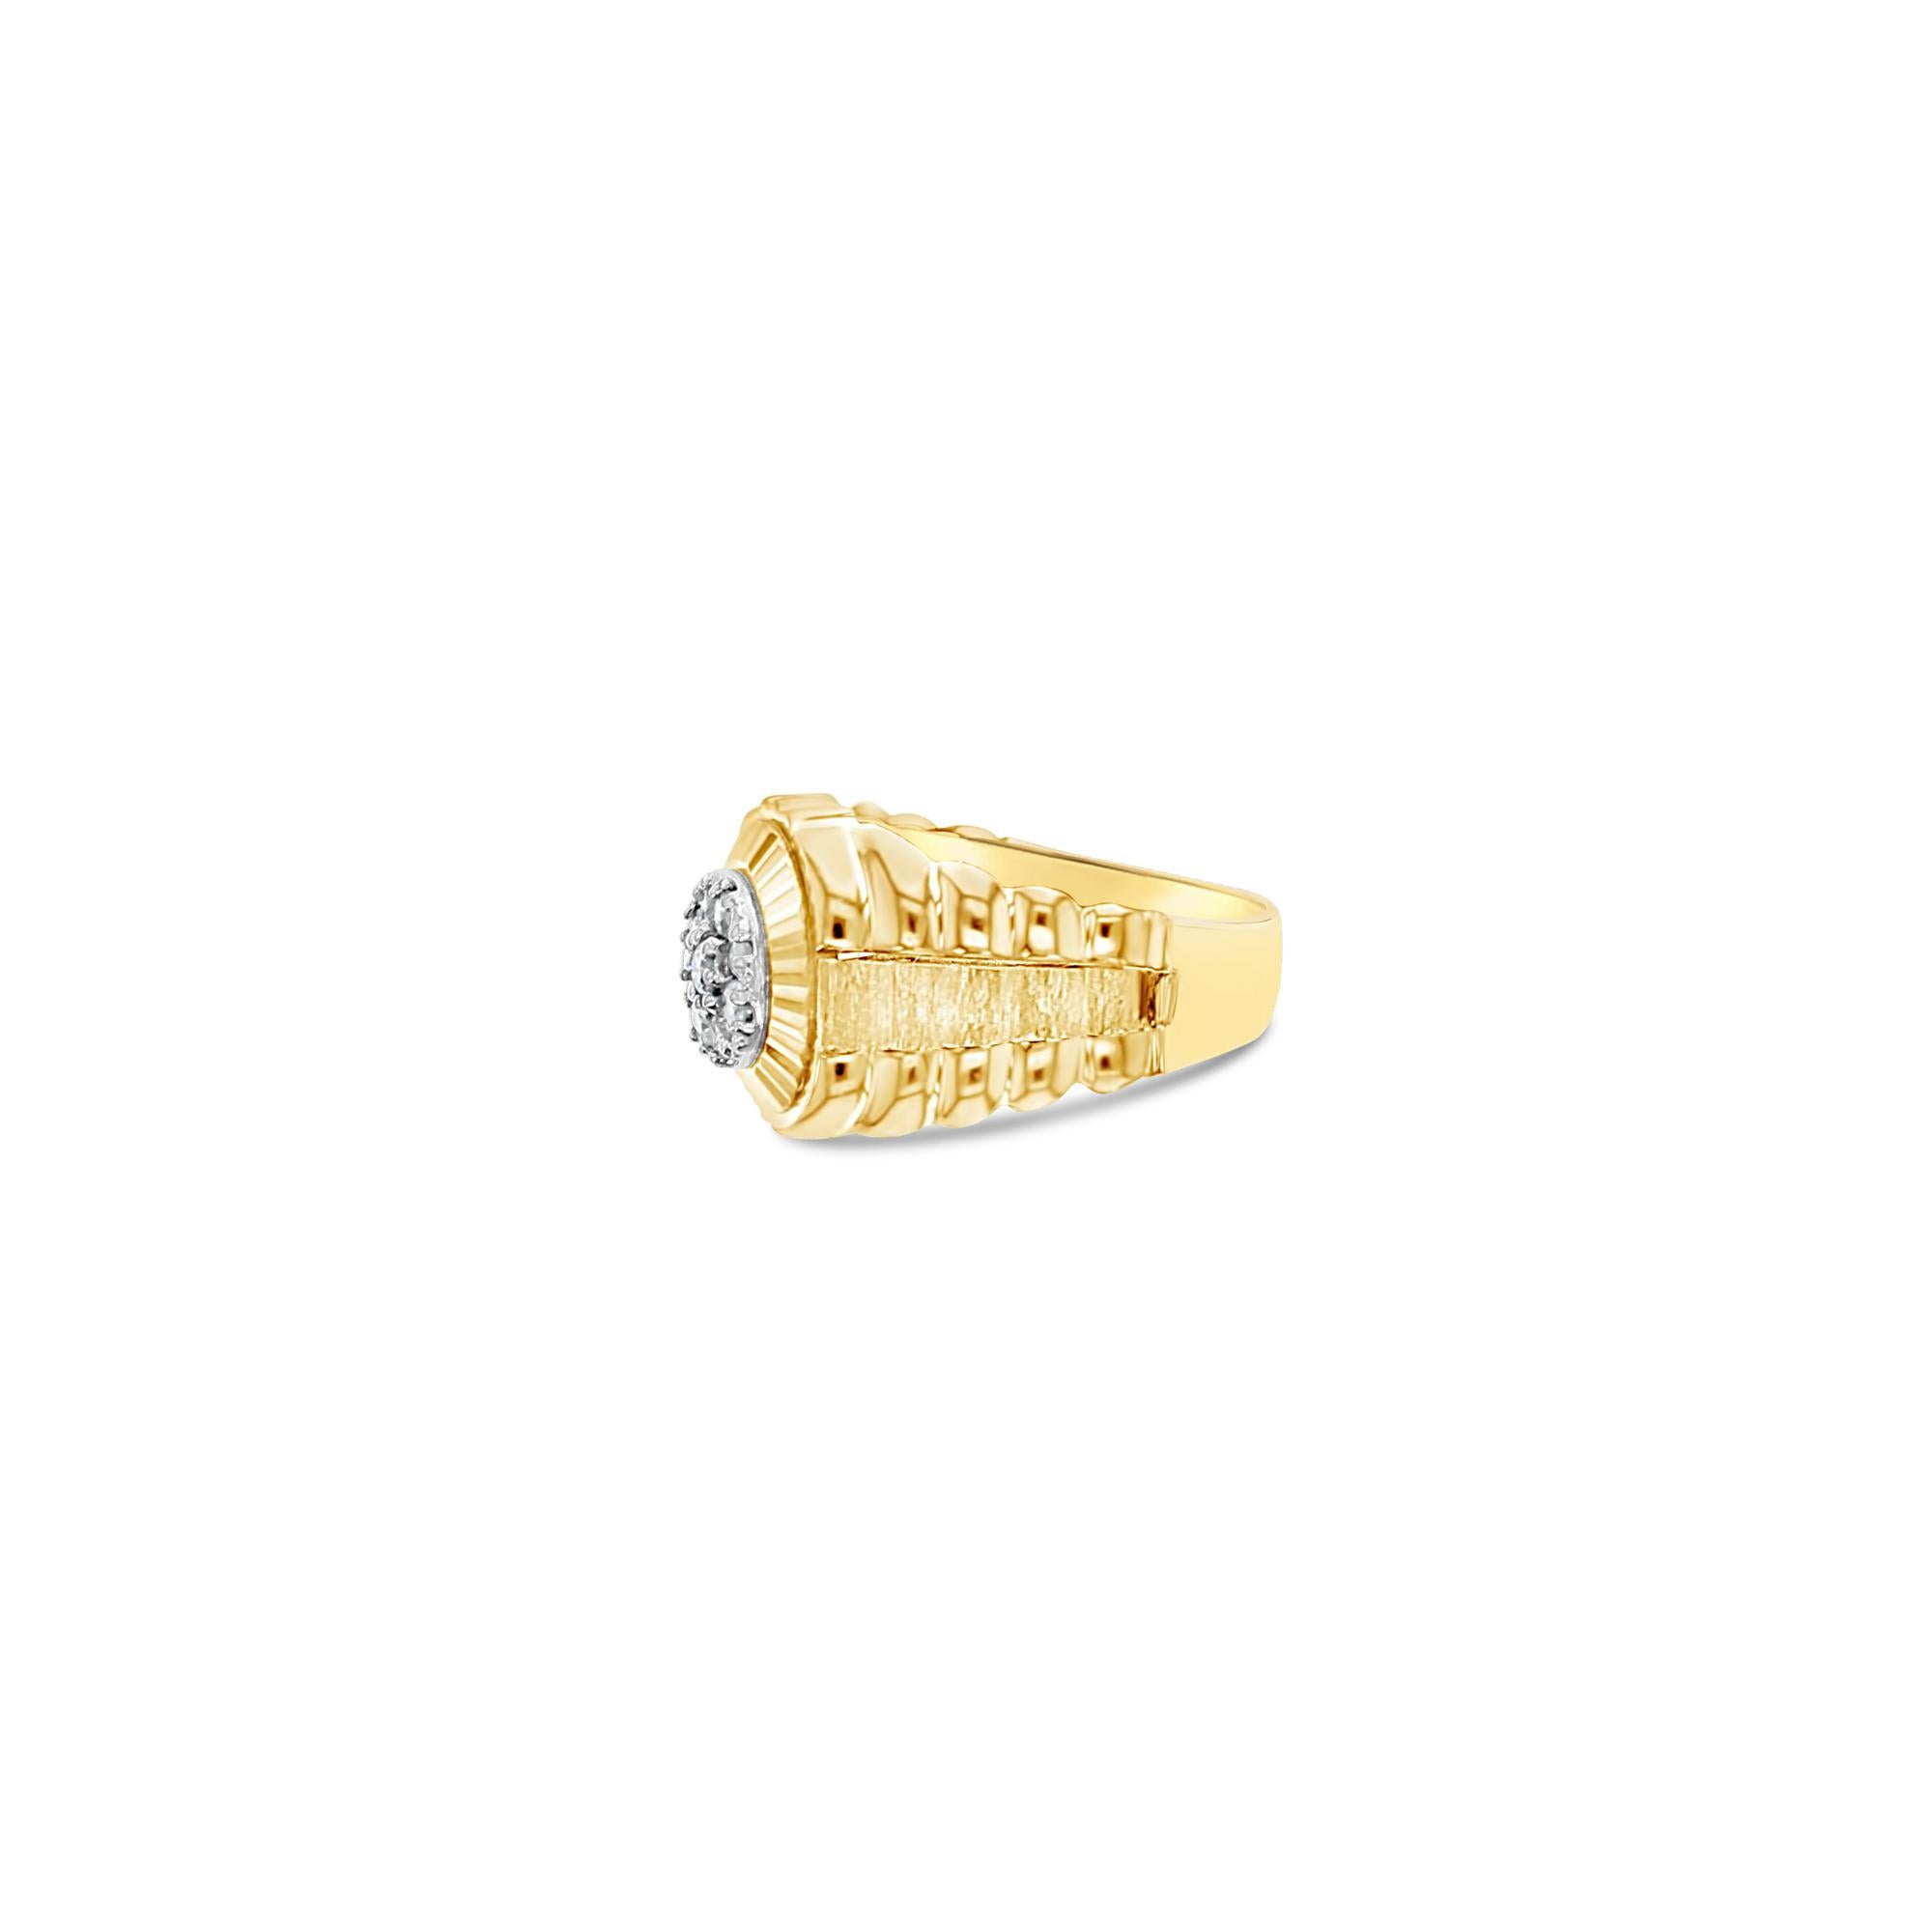 ♥ Product Summary ♥

Details: Fluted Bezel, Bark Center with Polished Sides 
Main Stone: Diamonds 
Total Diamond Carat Weight: .50cttw
Diamond Color: H
Diamond Clarity: SI2
Metal Purity: 14k Yellow Gold
Stone Cut: Round
Weight: 9 grams